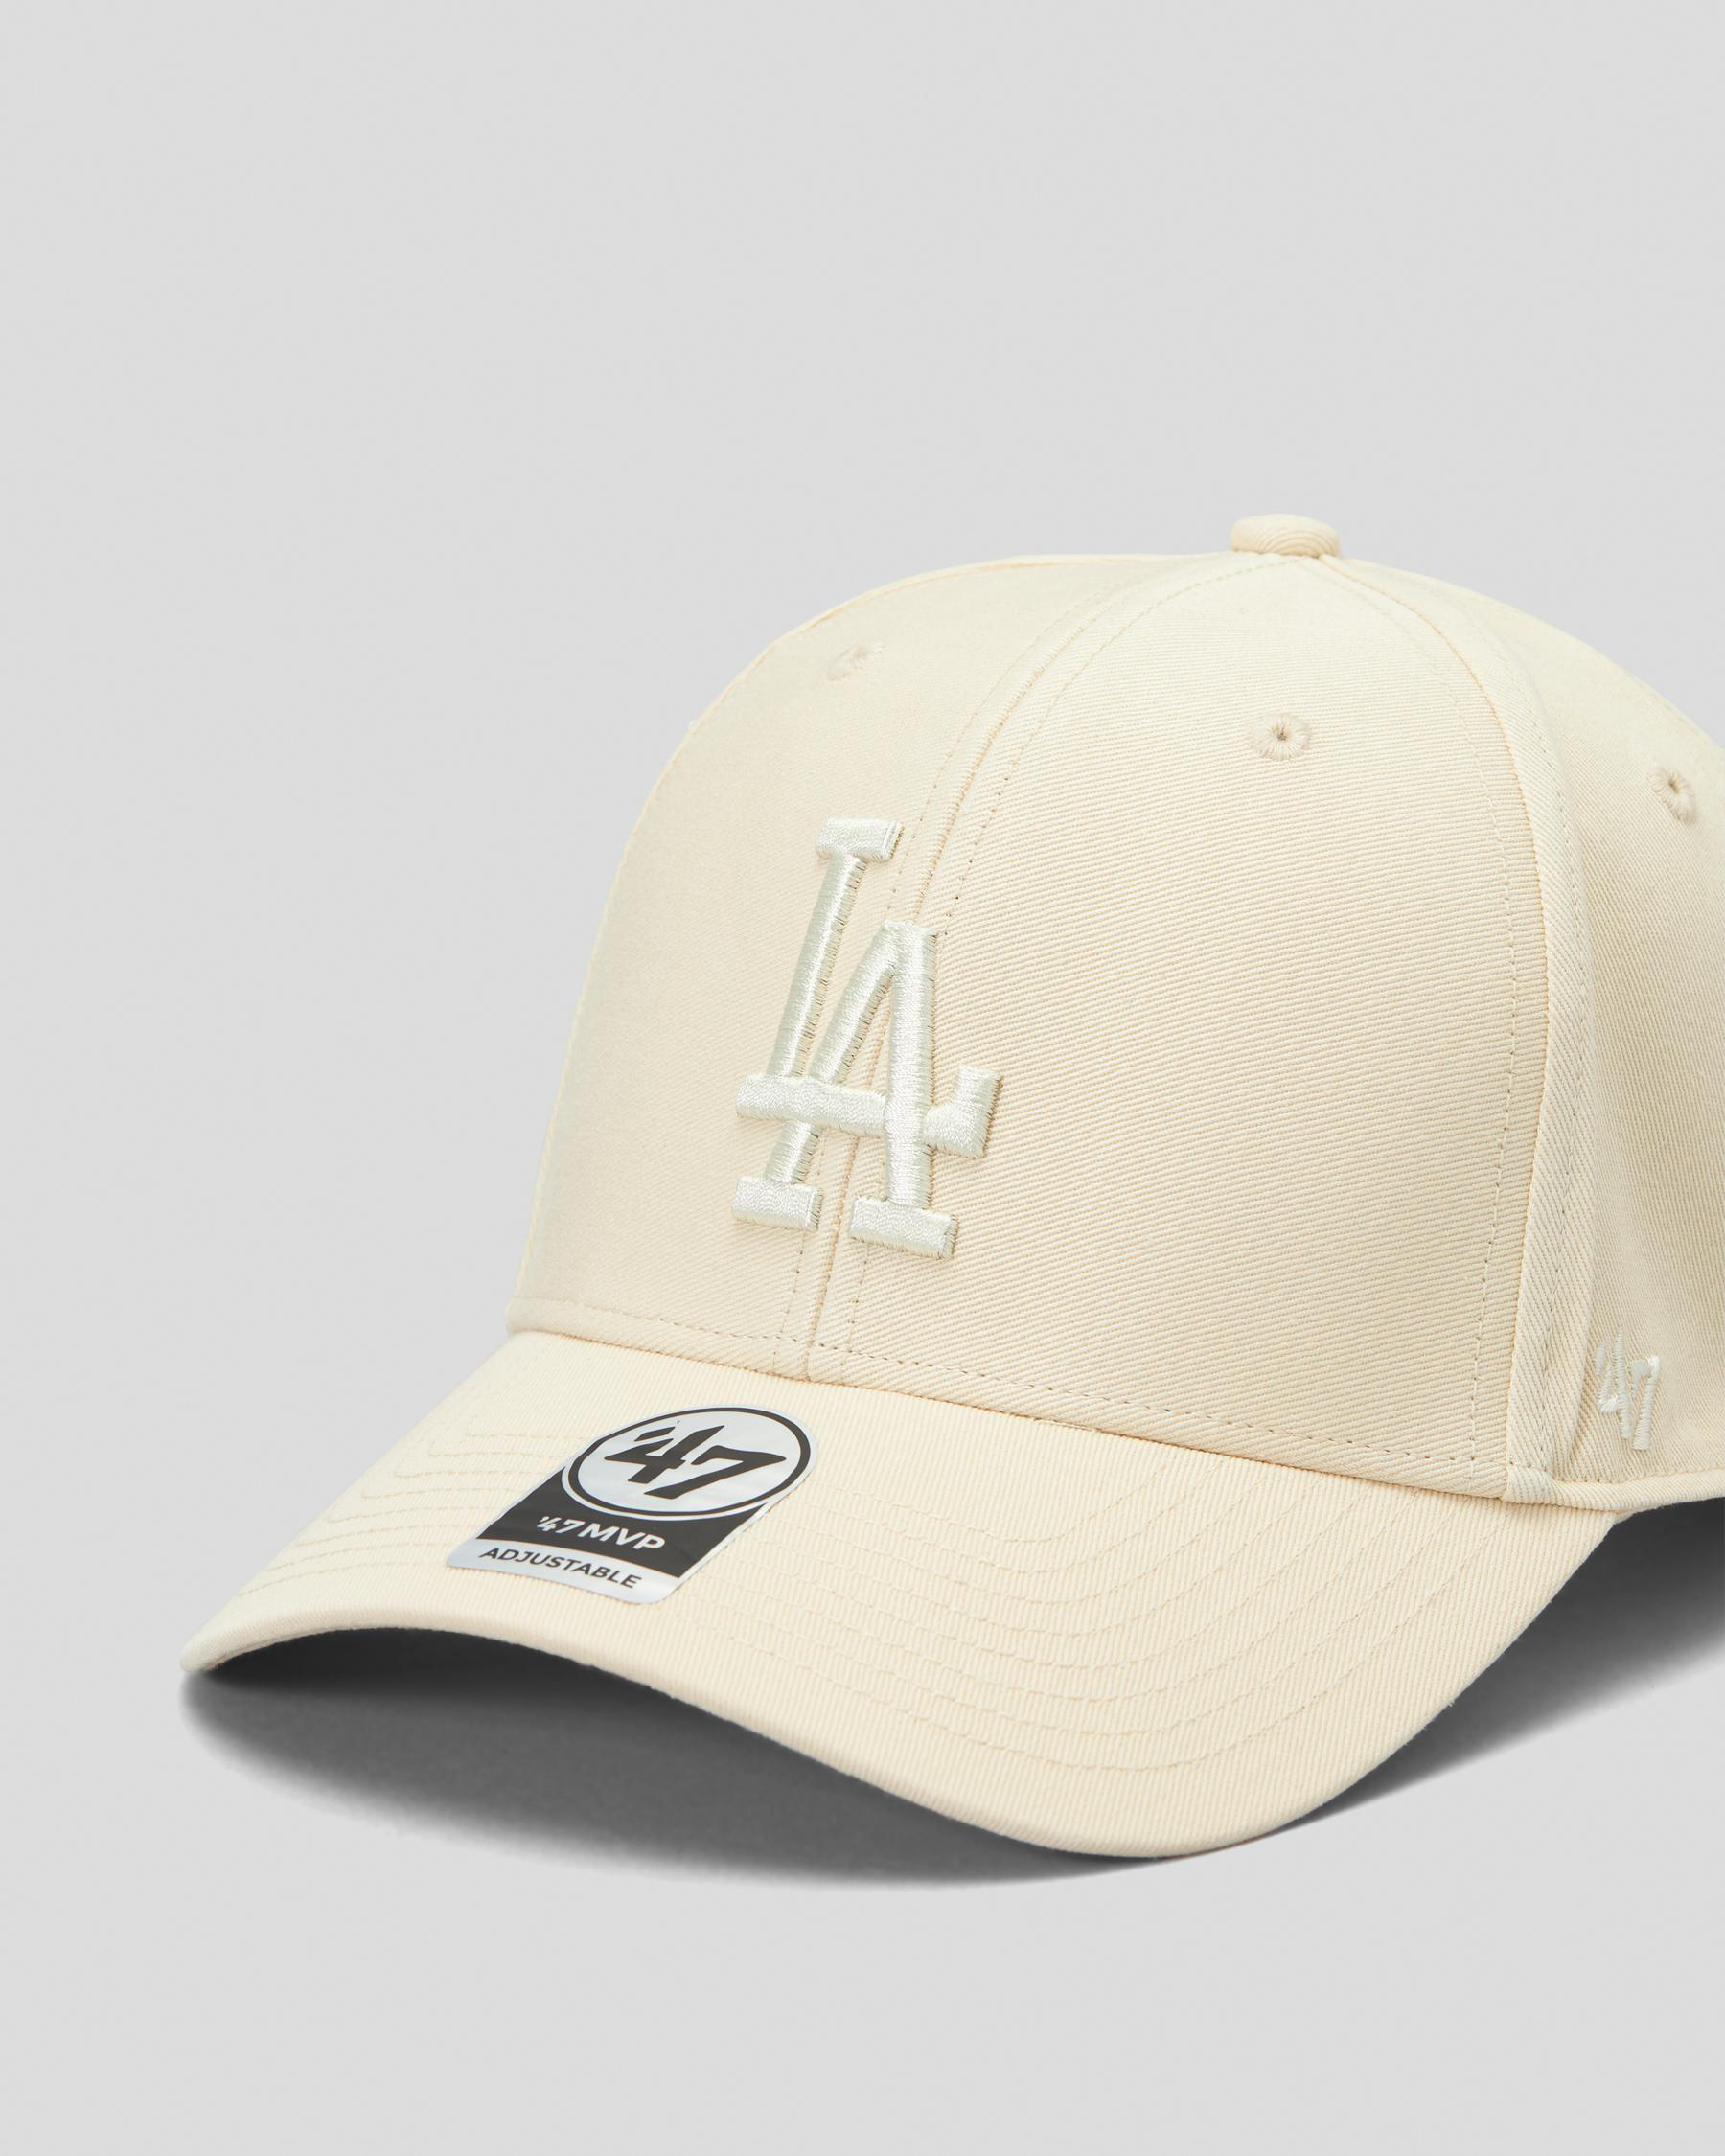 Forty Seven LA Dodgers Cap In Dark Green - Fast Shipping & Easy Returns -  City Beach United States